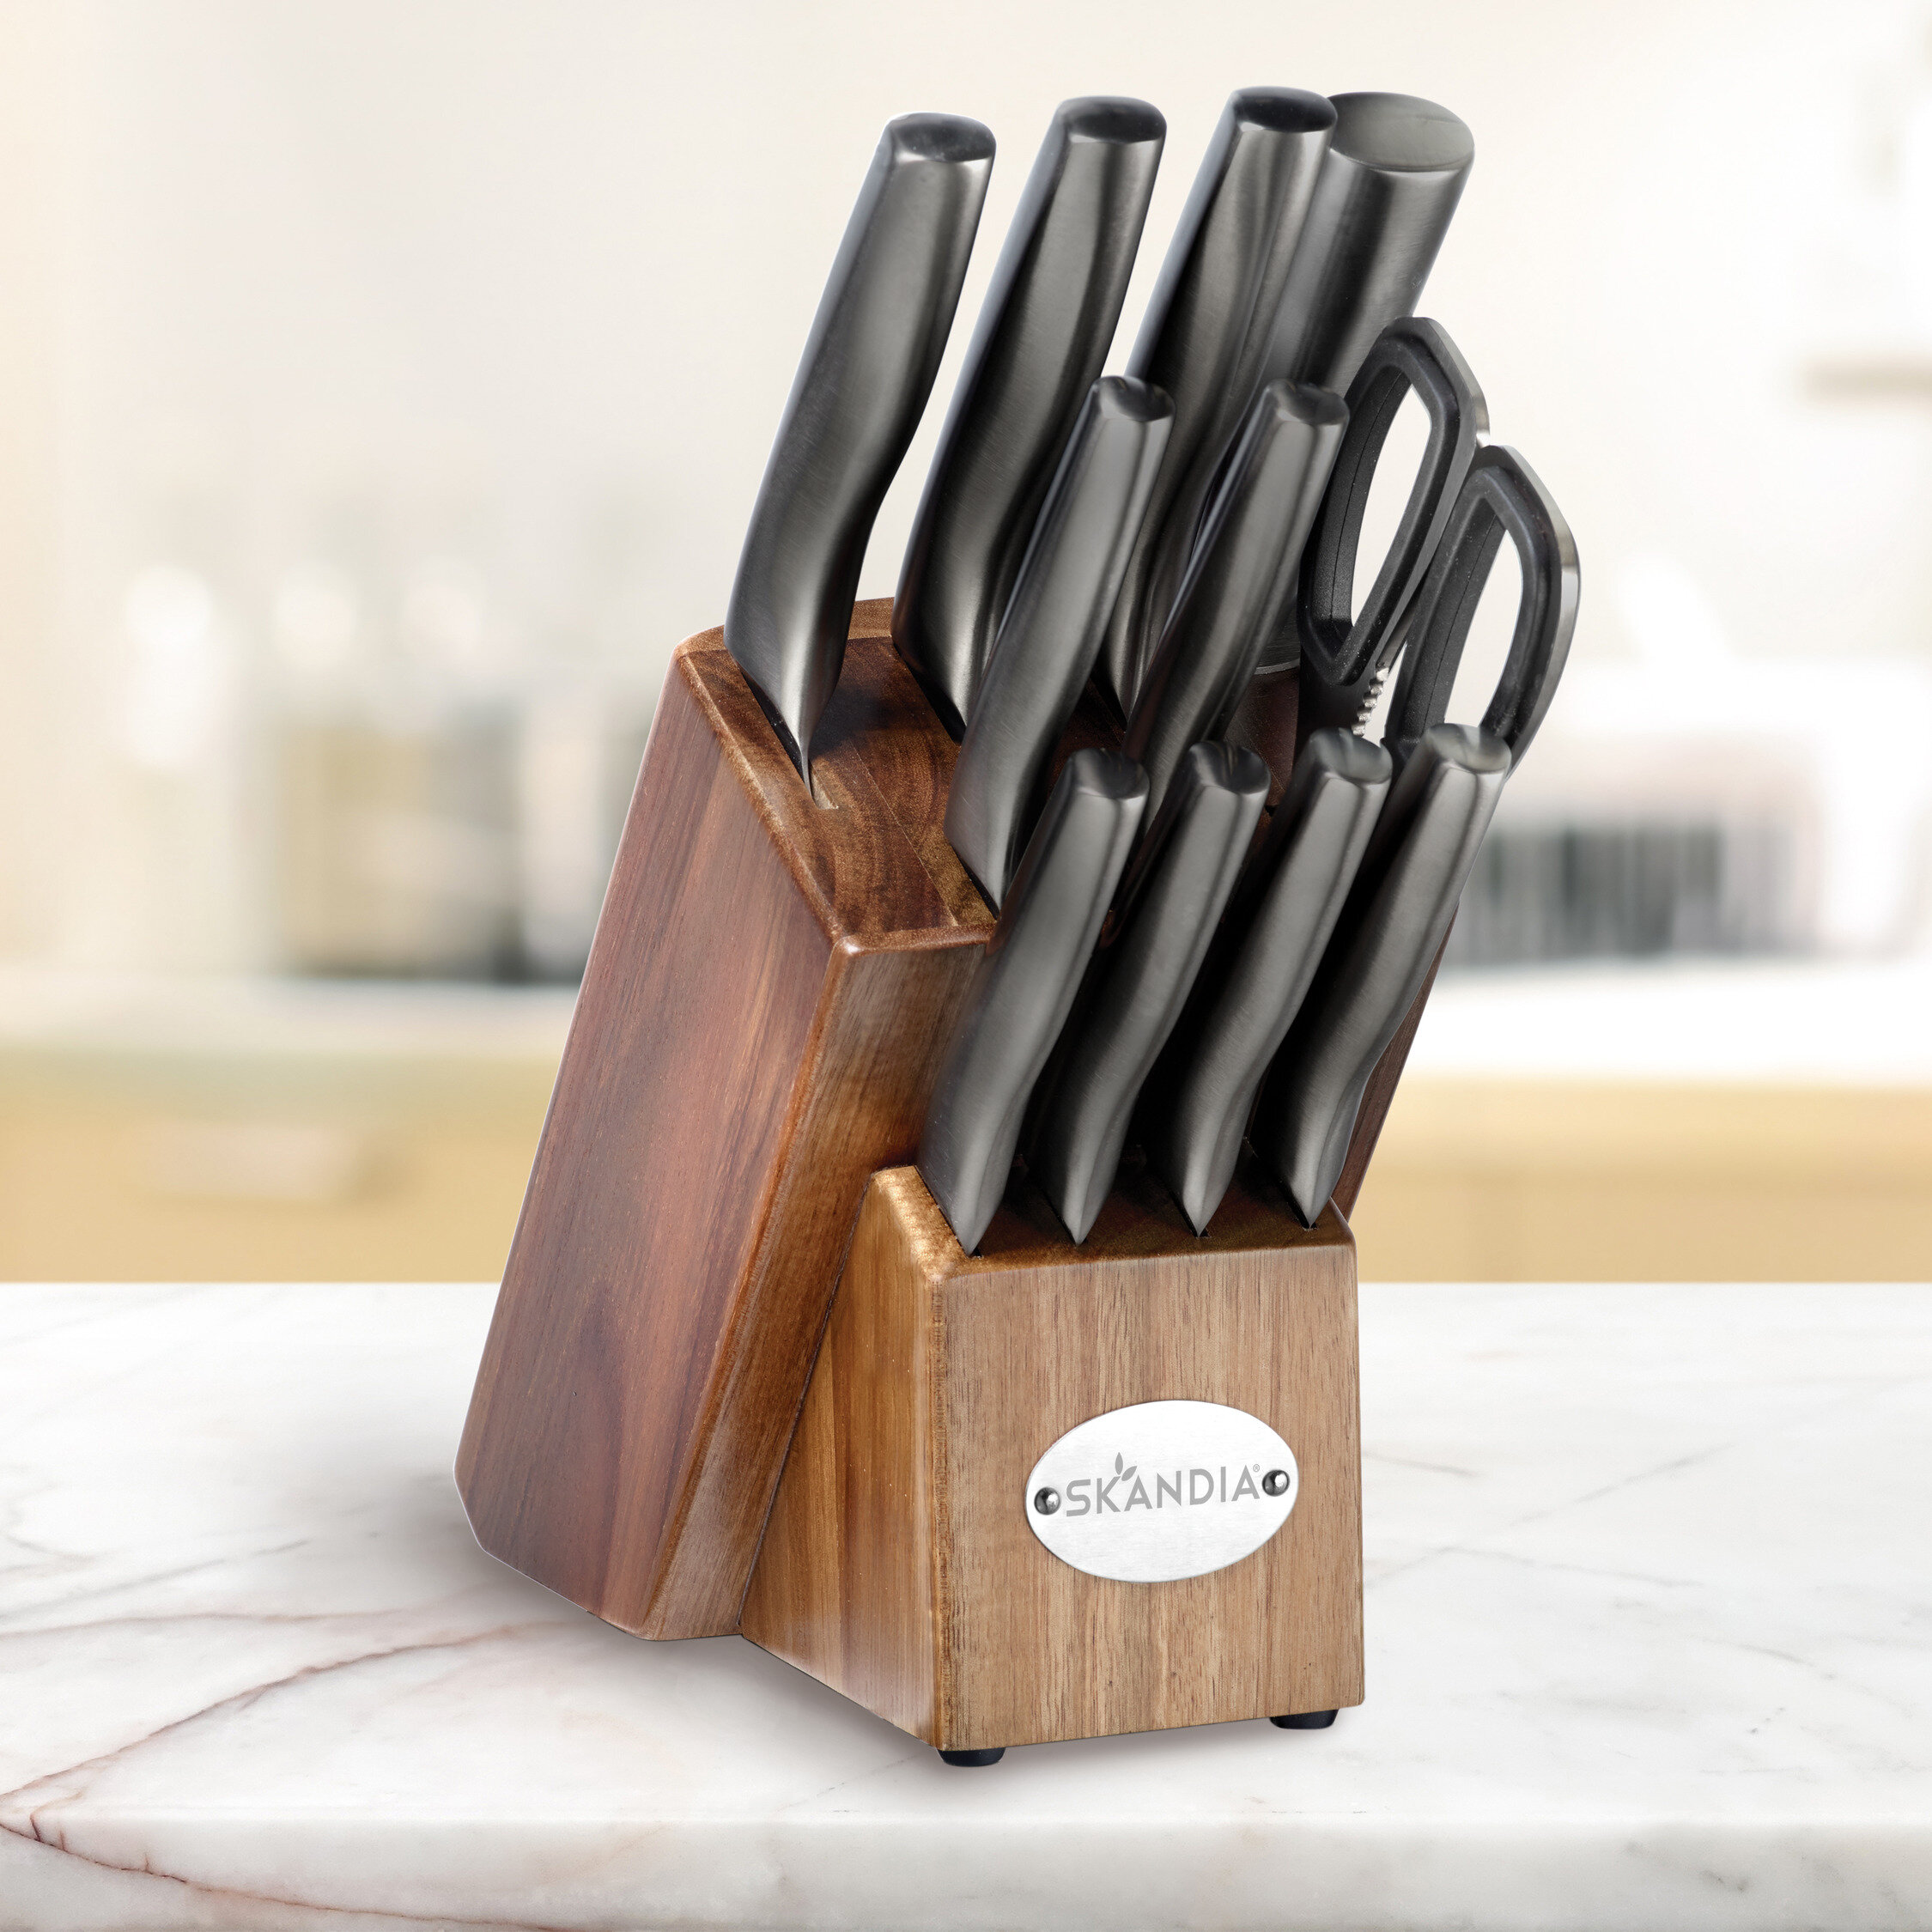 Beautiful 12-piece Forged Kitchen Knife Set in White with Wood